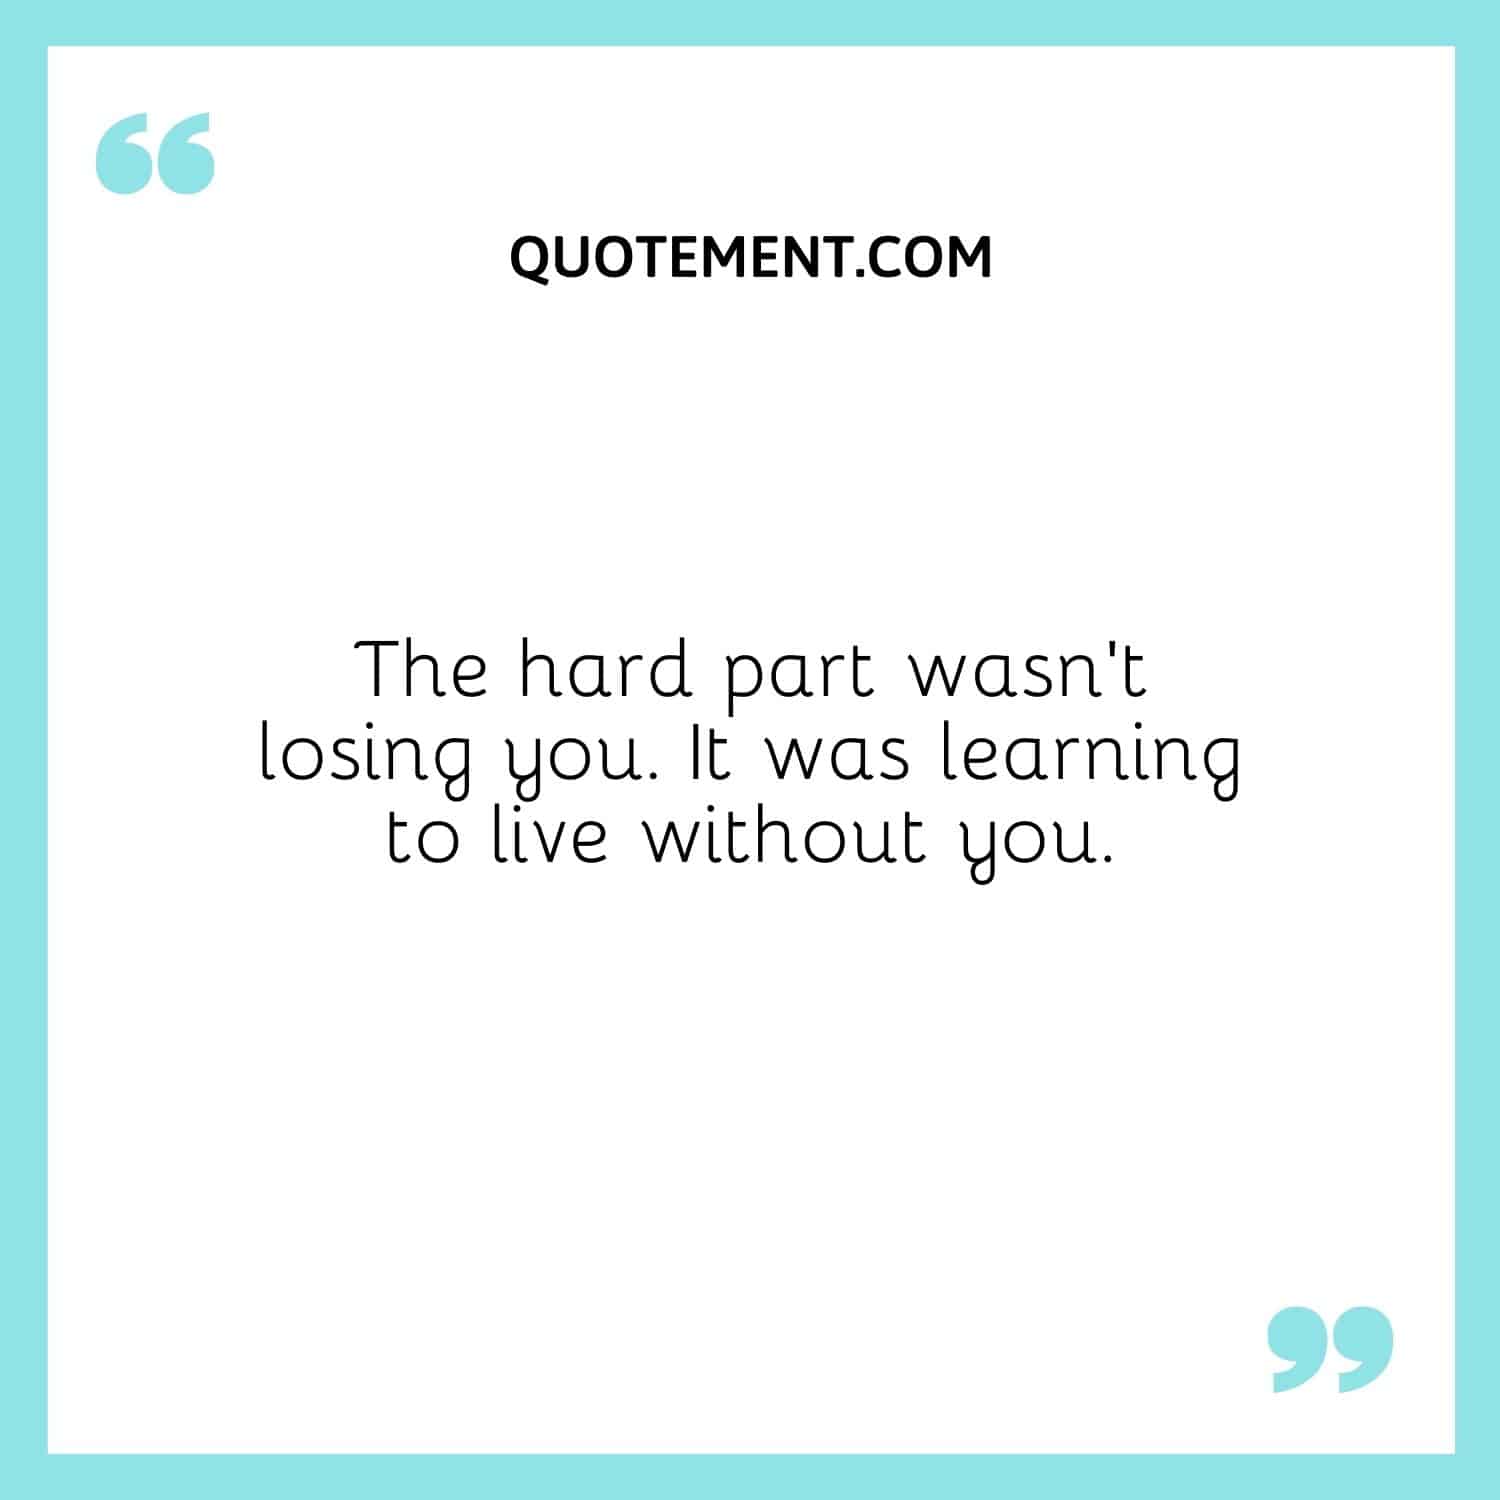 The hard part wasn’t losing you. It was learning to live without you.